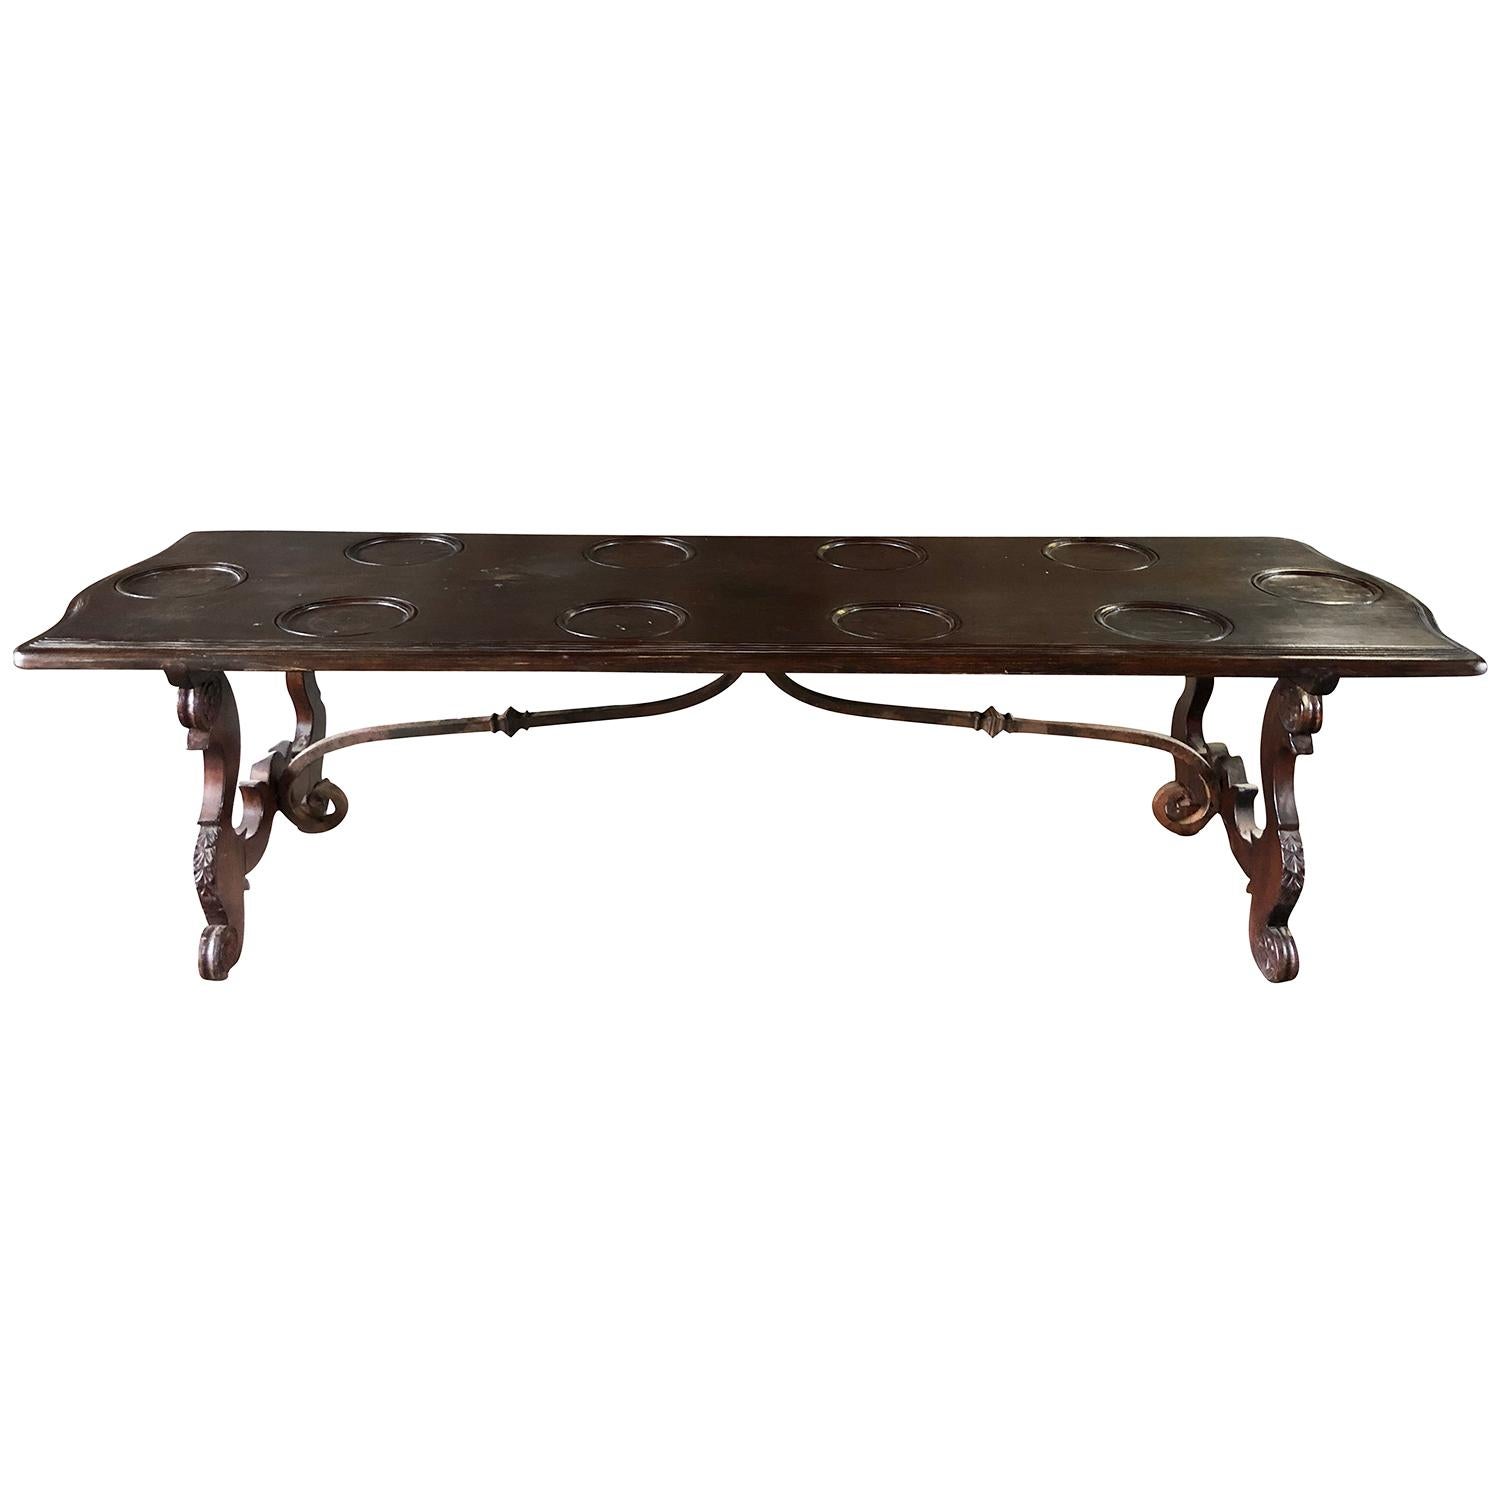 A rectangular, antique very long Tuscan Renaissance dining room table made of hand crafted Walnut, in good condition. The top of the Italian center table has a dark original patina with carved round plate inserts supported by two very ornate wrought